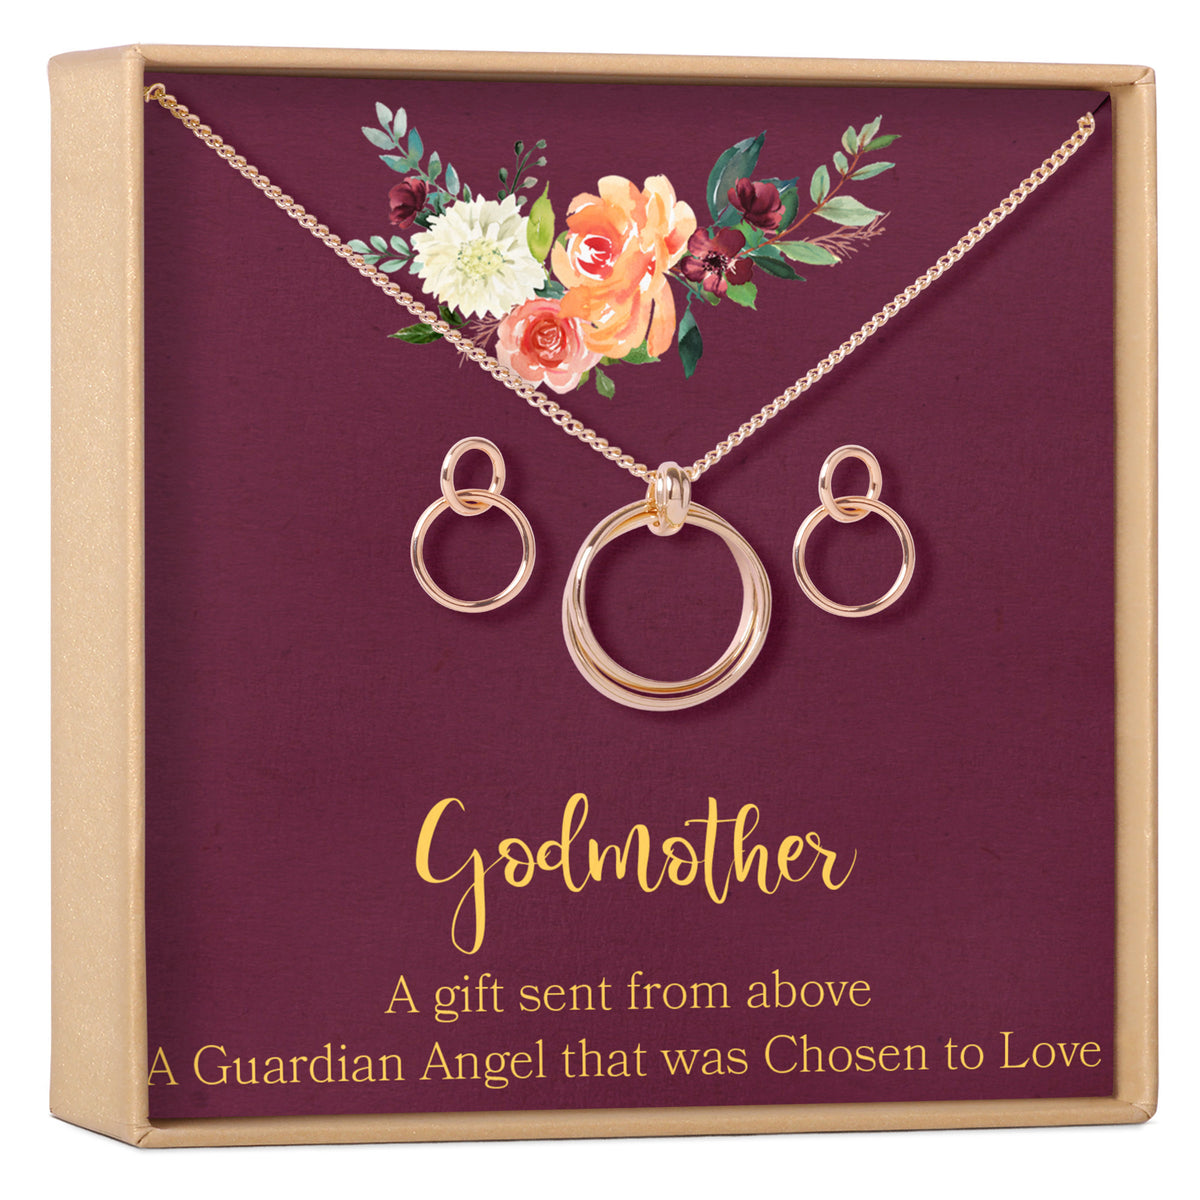 Godmother Linked Circles Earring and Necklace Jewelry Set